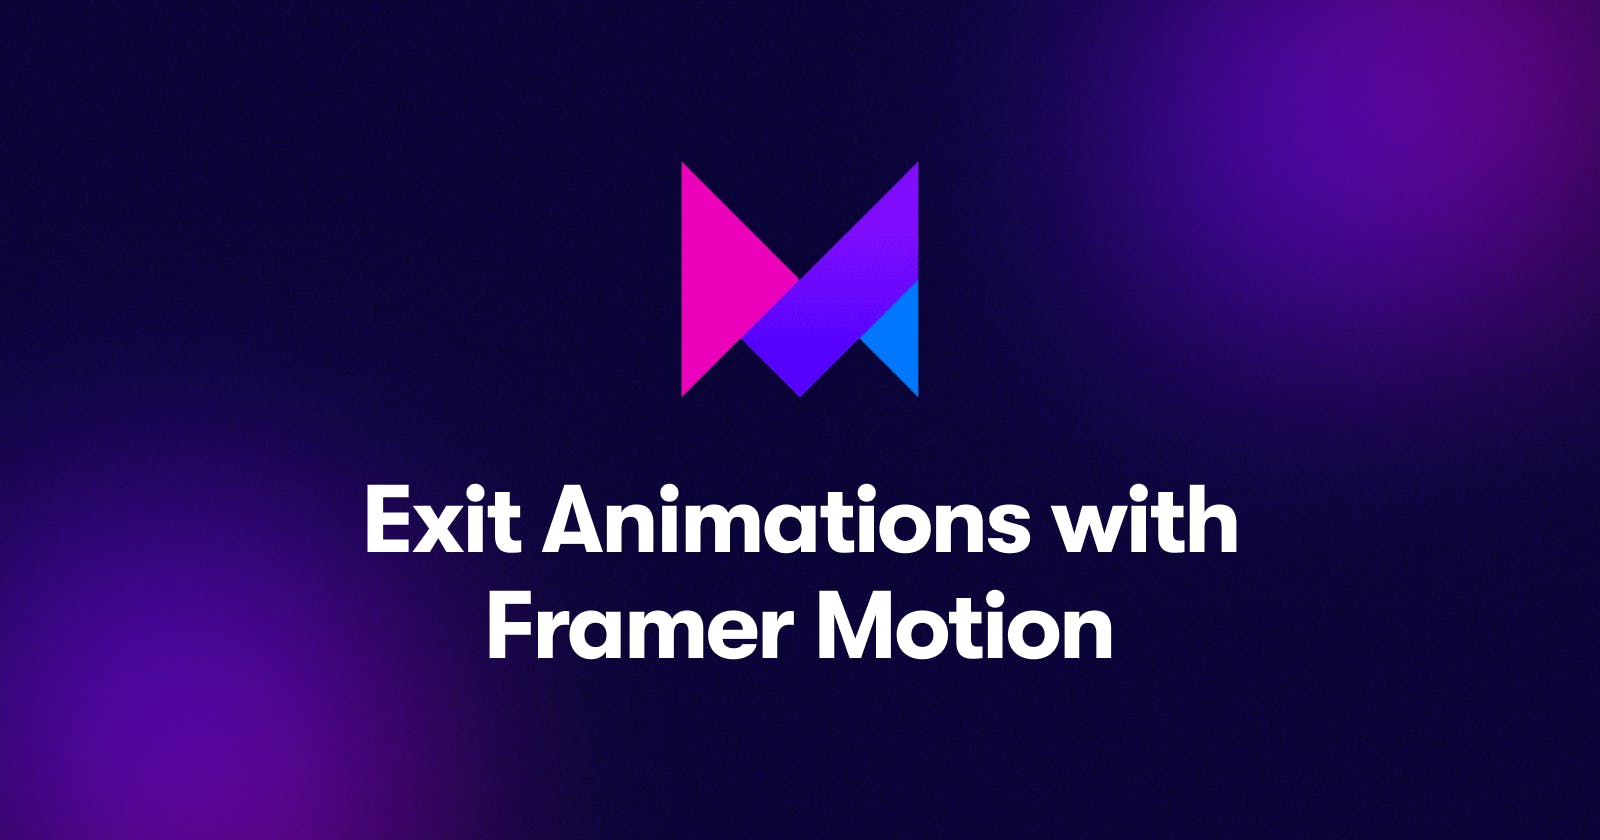 How to create exit animations with Framer Motion